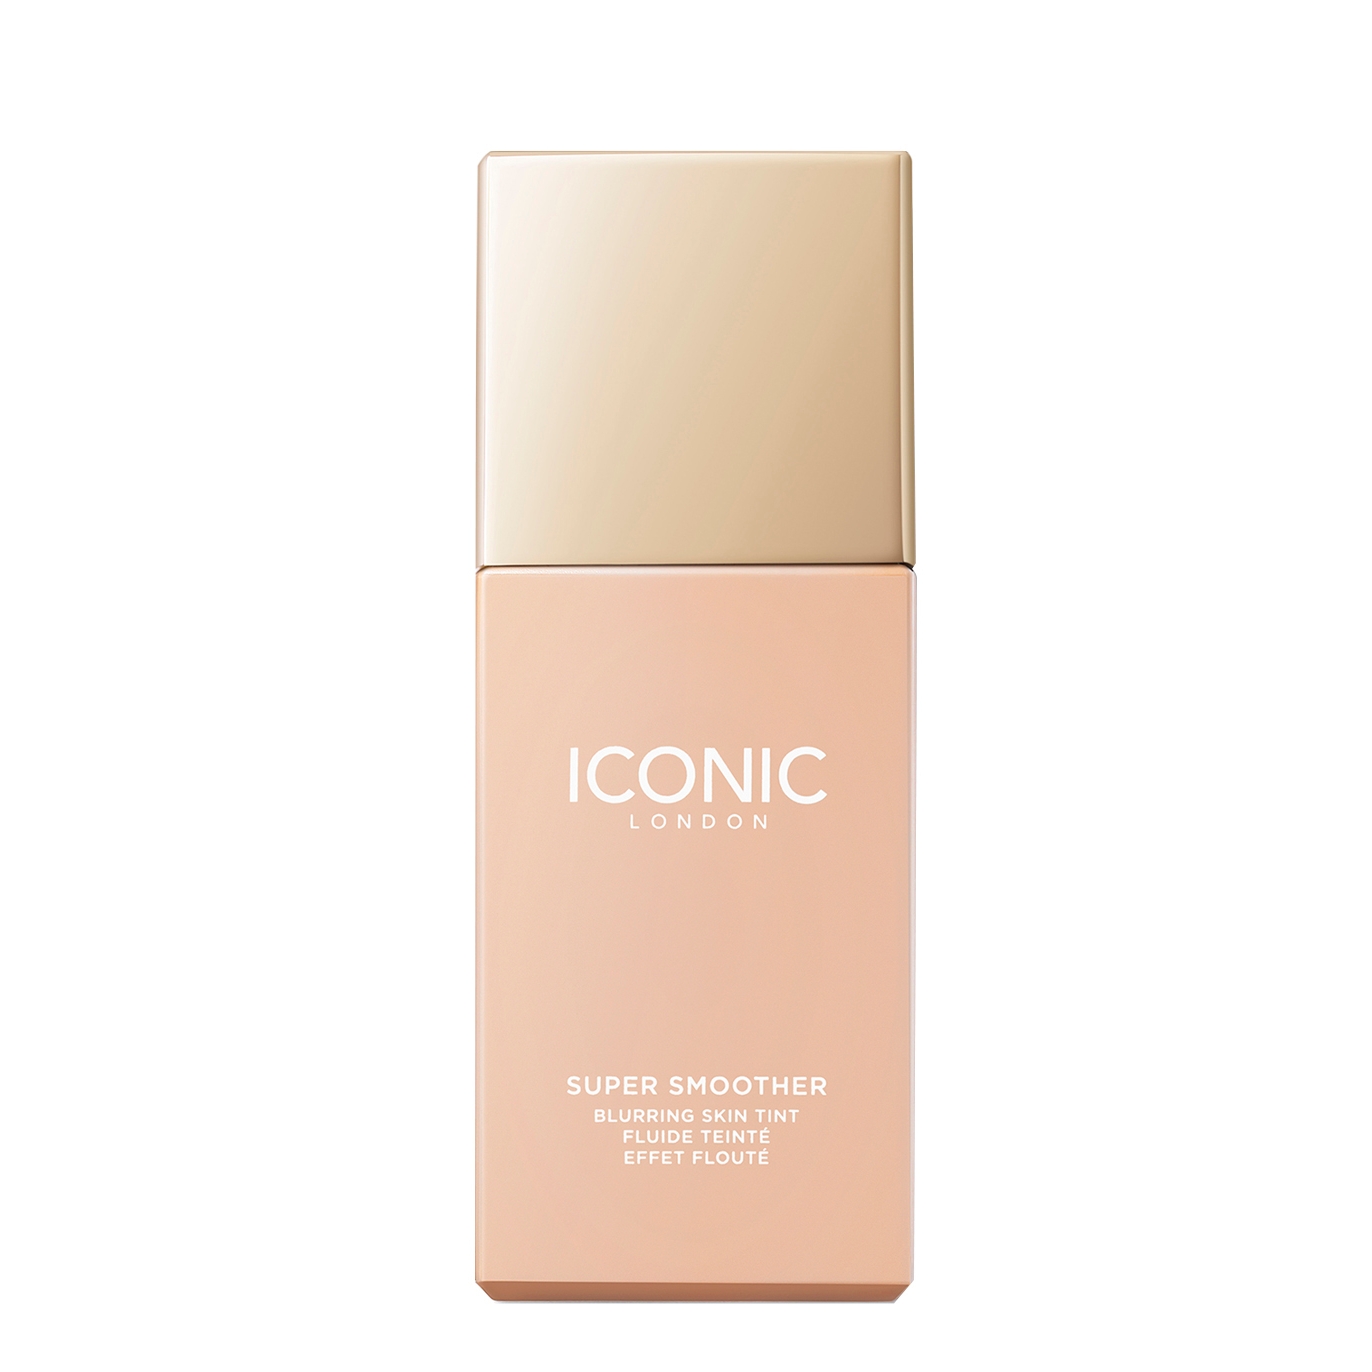 Iconic London Super Smoother Blurring Skin Tint - Colour Cool Fair